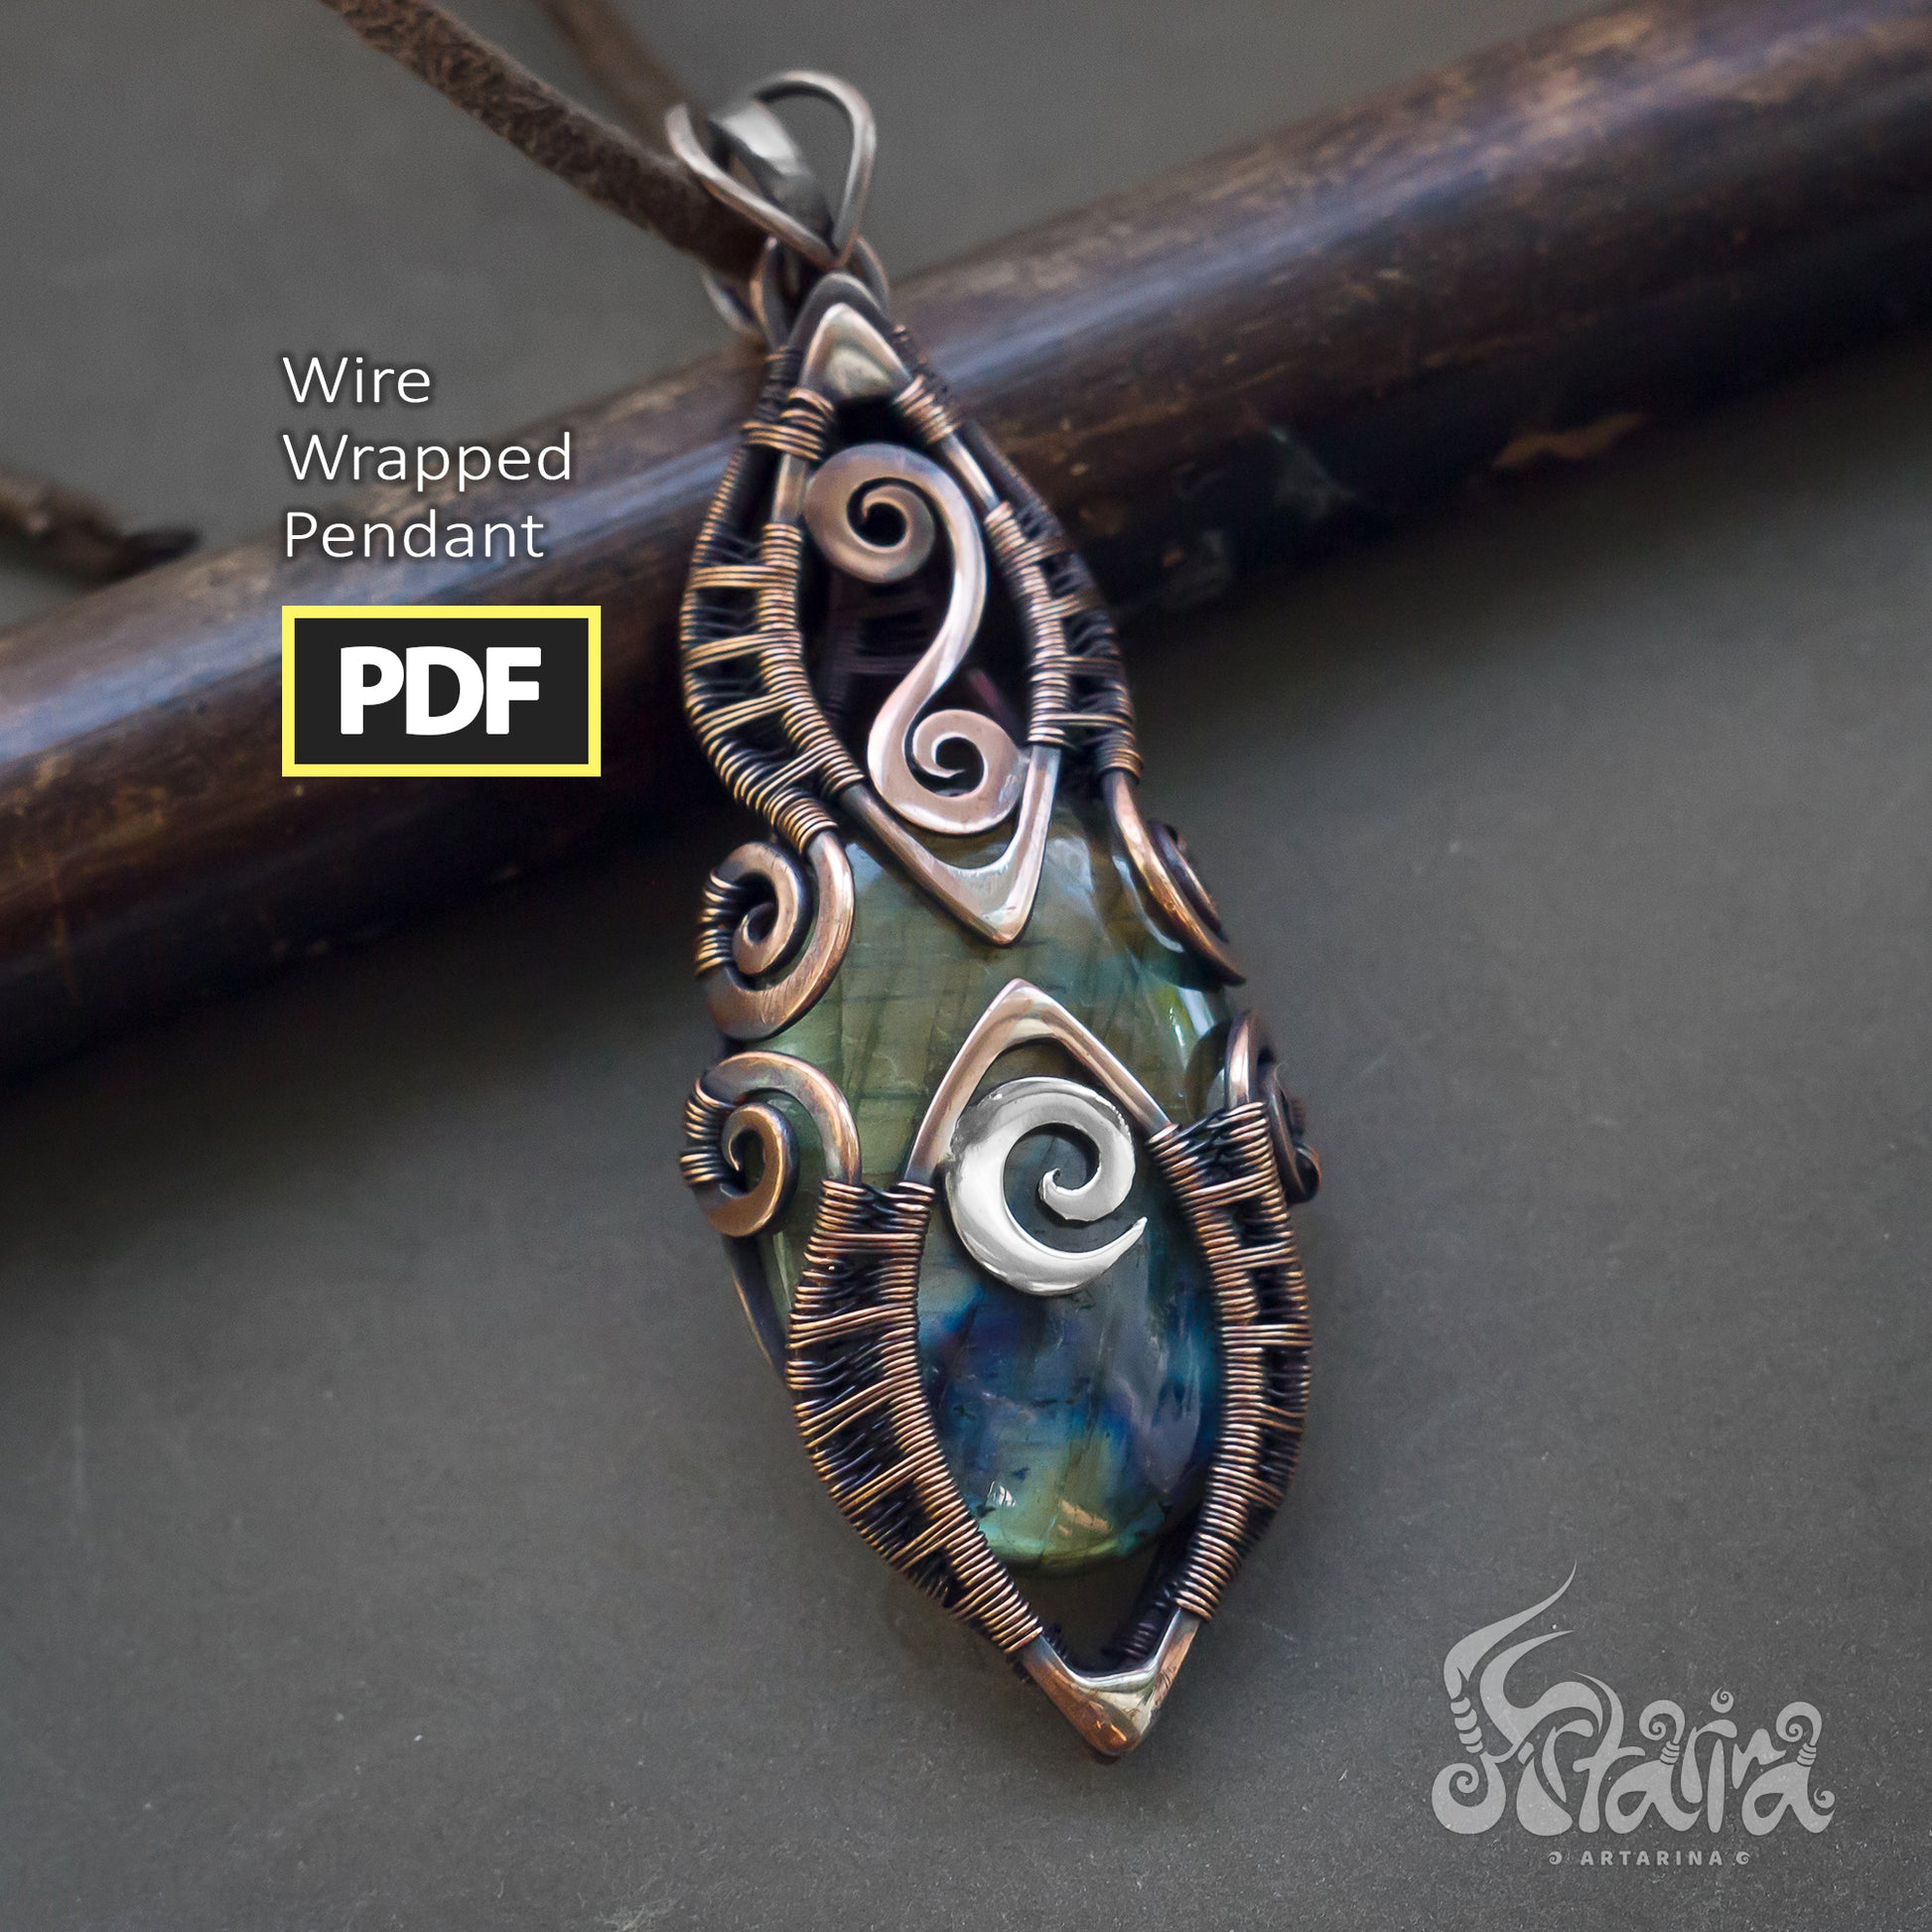 Wire-Wrapping Tutorials: 13 DIY Wire-Wrapped Pendants  Wire wrap jewelry  designs, Wire wrapped stone jewelry, Wire jewelry designs